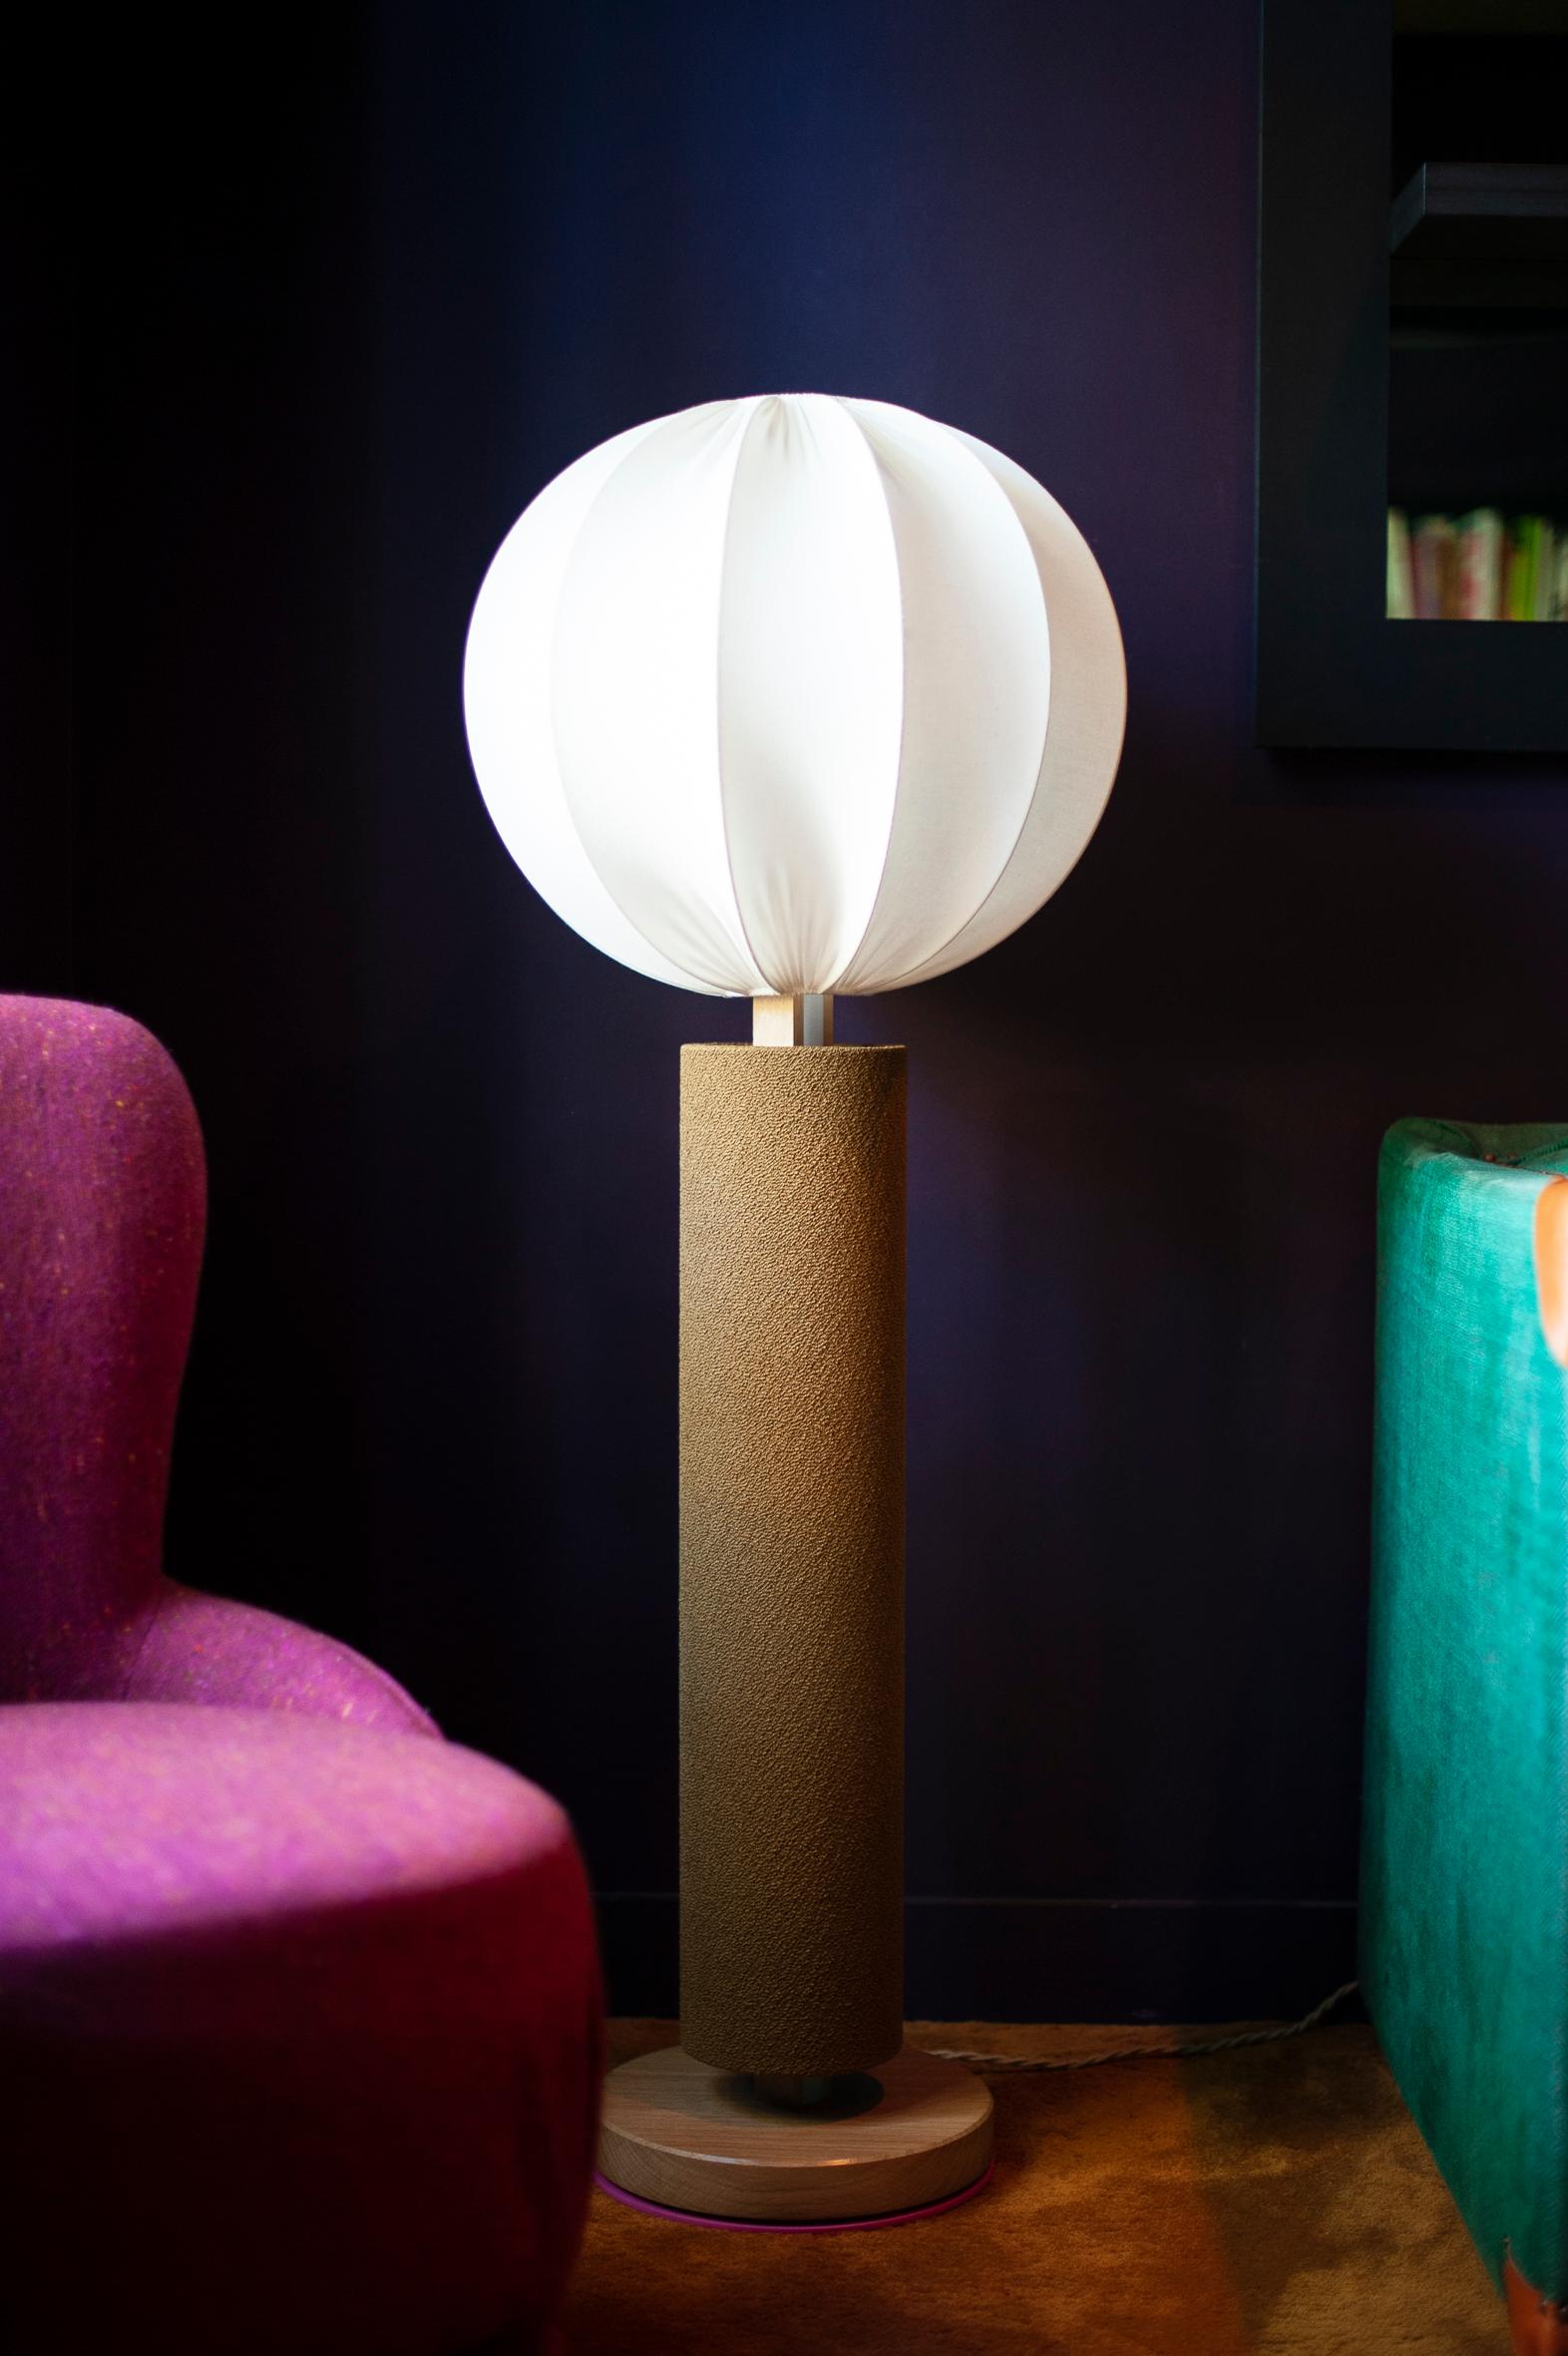  MIMA#1: Ball lampshade in the upper part /

The MIMA model is soft, elegant. It will dress up your interior and add a touch of fantasy.
This lamp will represent a centrepiece in your decoration.

Inspired by the 70s, Angélique Delaire designed the